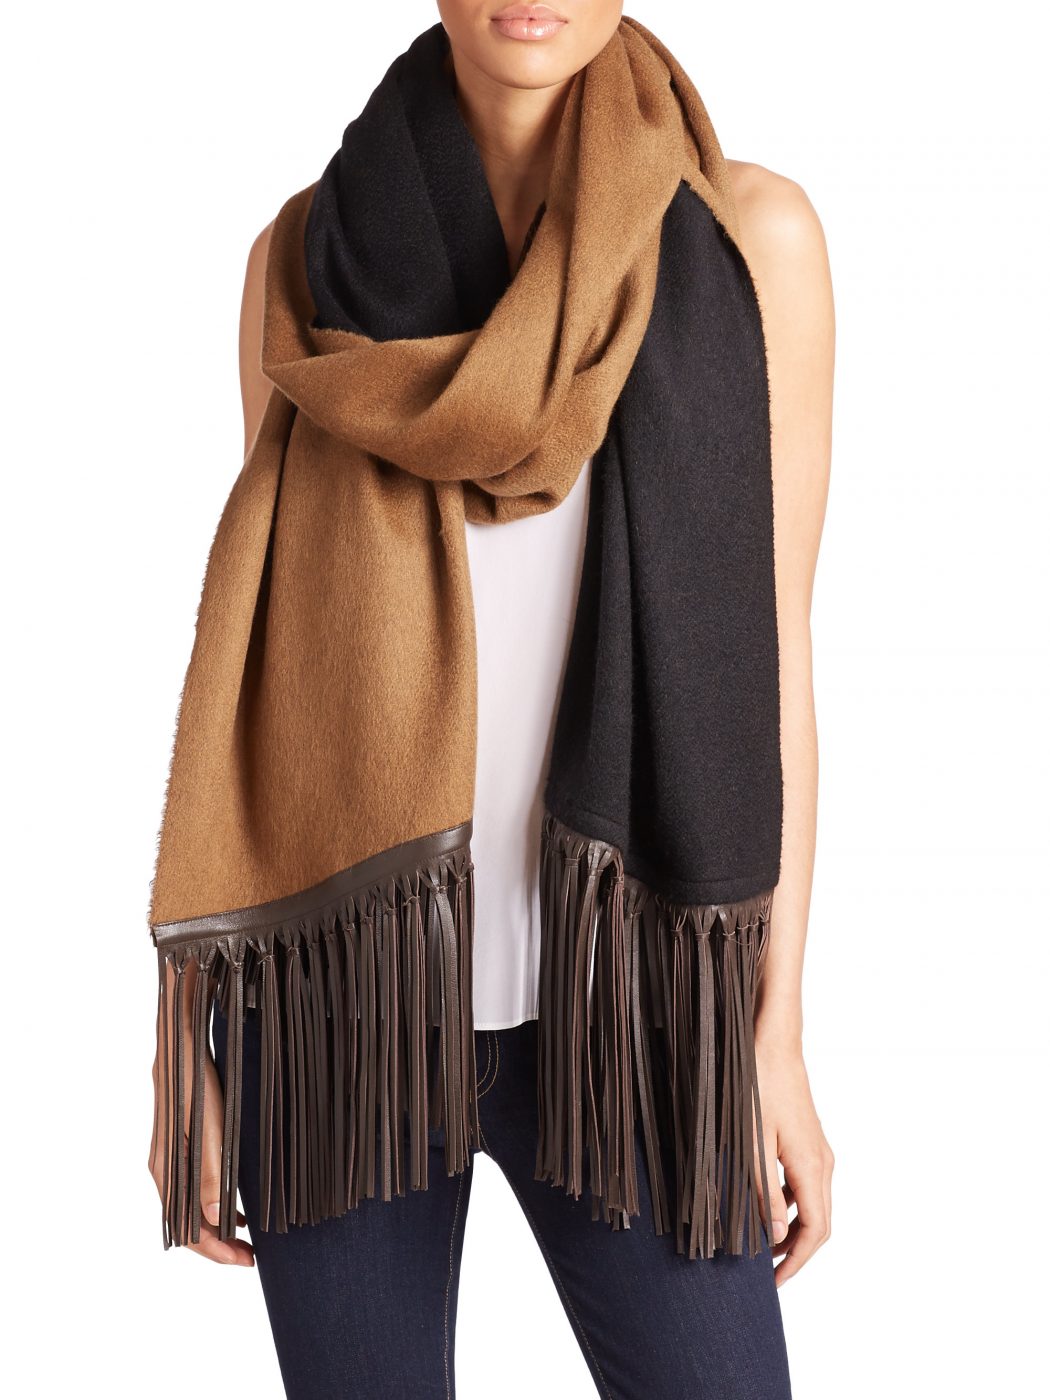 Cashmere Scarf4 22+ Elegant Scarf Trend Forecast for Winter & Fall - 12